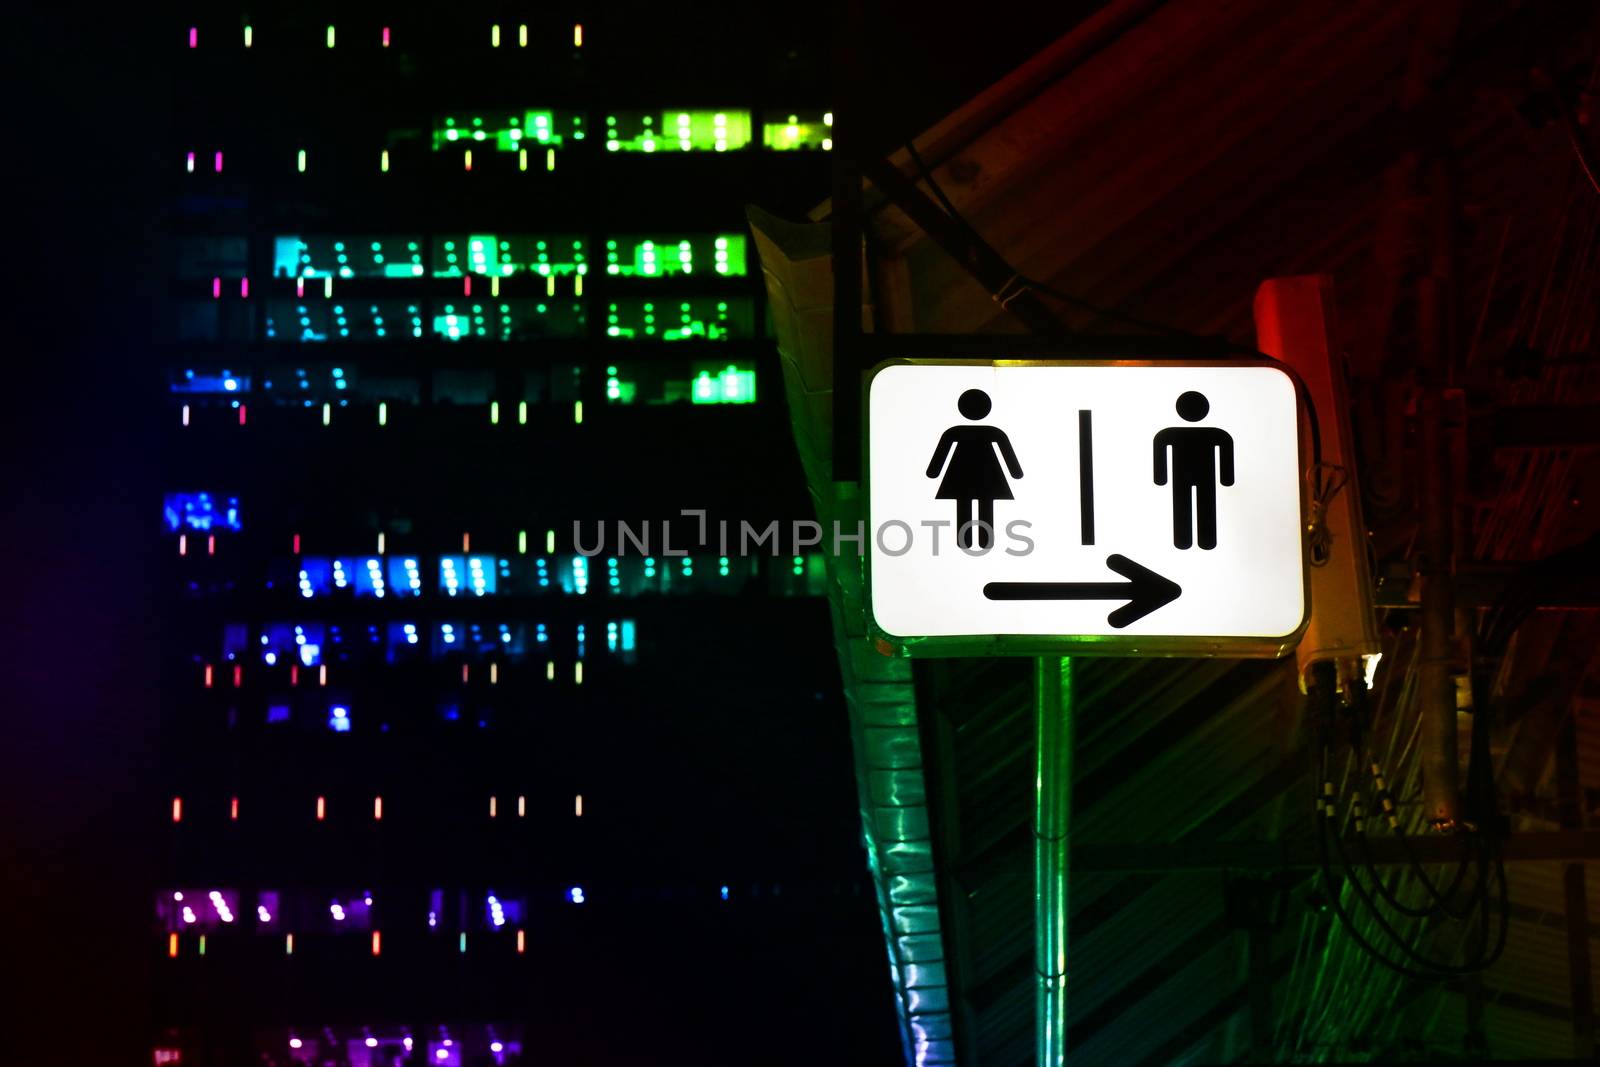 Signs night bathroom, toilet sign male - female, signs, lights, signs, signs for toilets in pubs - public house, night parties and multicolored lights